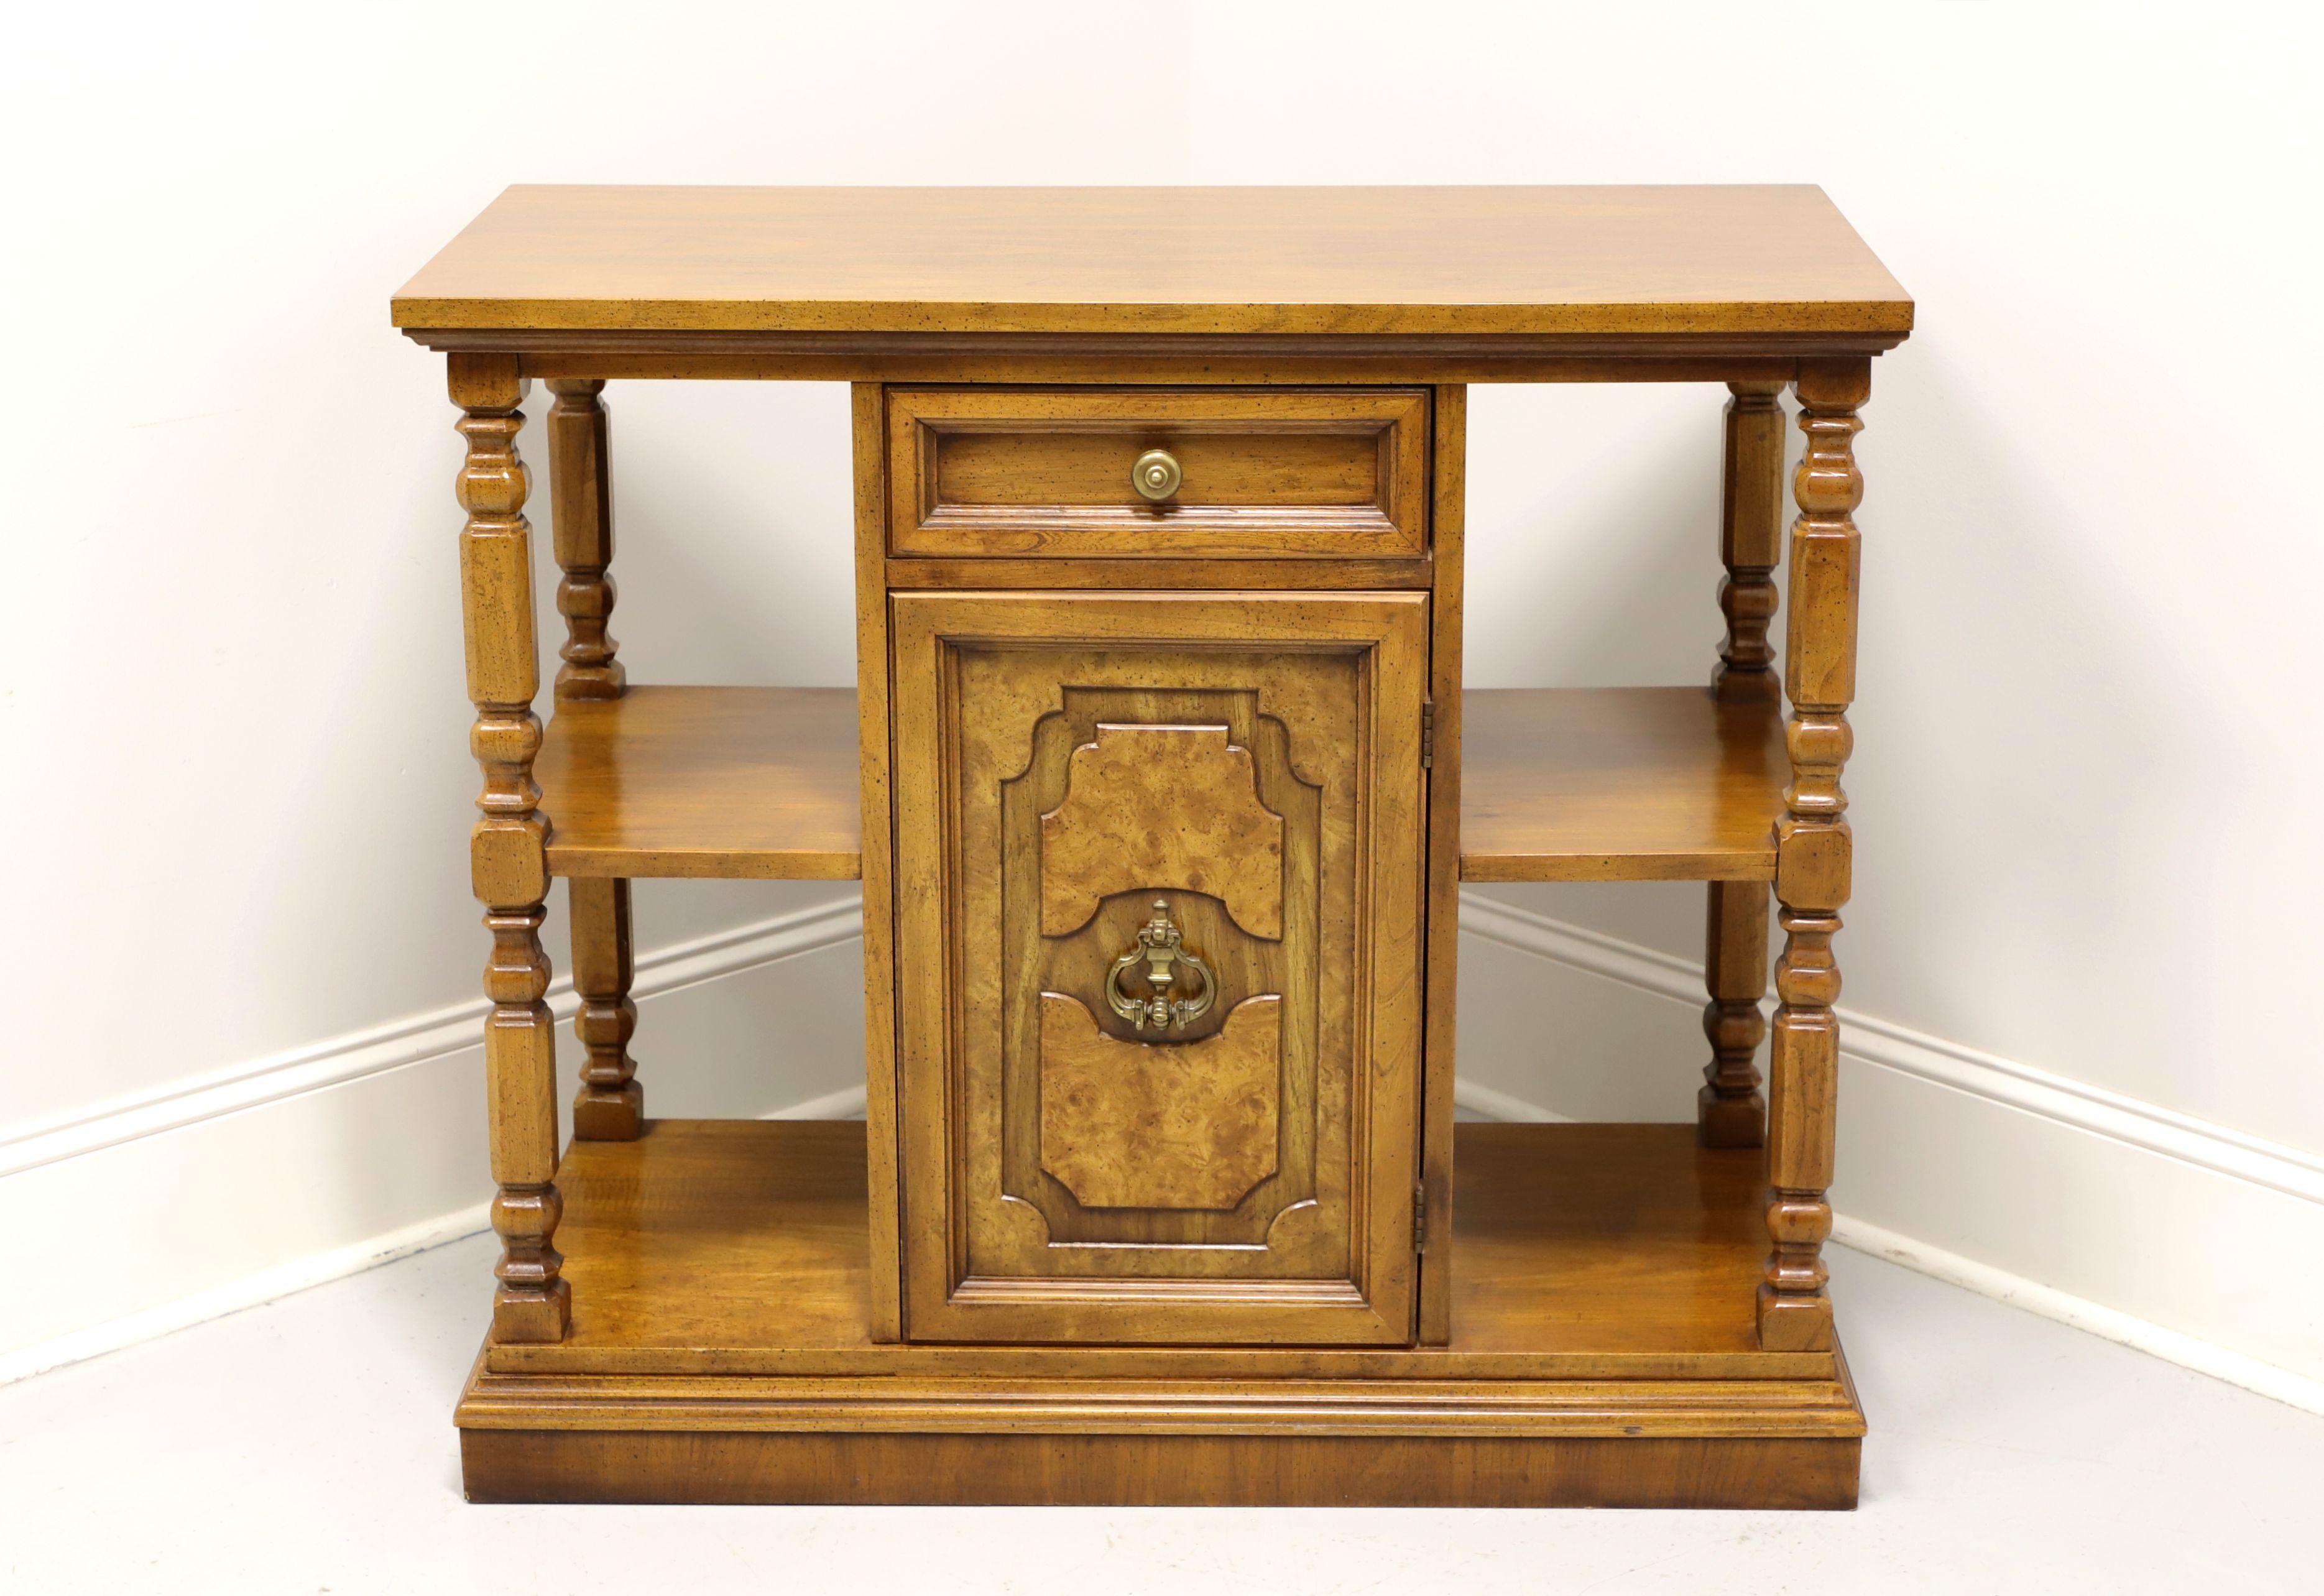 A Mediterranean style console cabinet with open shelves by Bernhardt. Walnut with a distressed finish, burl to door front, turned side posts and brass hardware. Features one dovetail drawer over a one door cabinet revealing a storage area with one